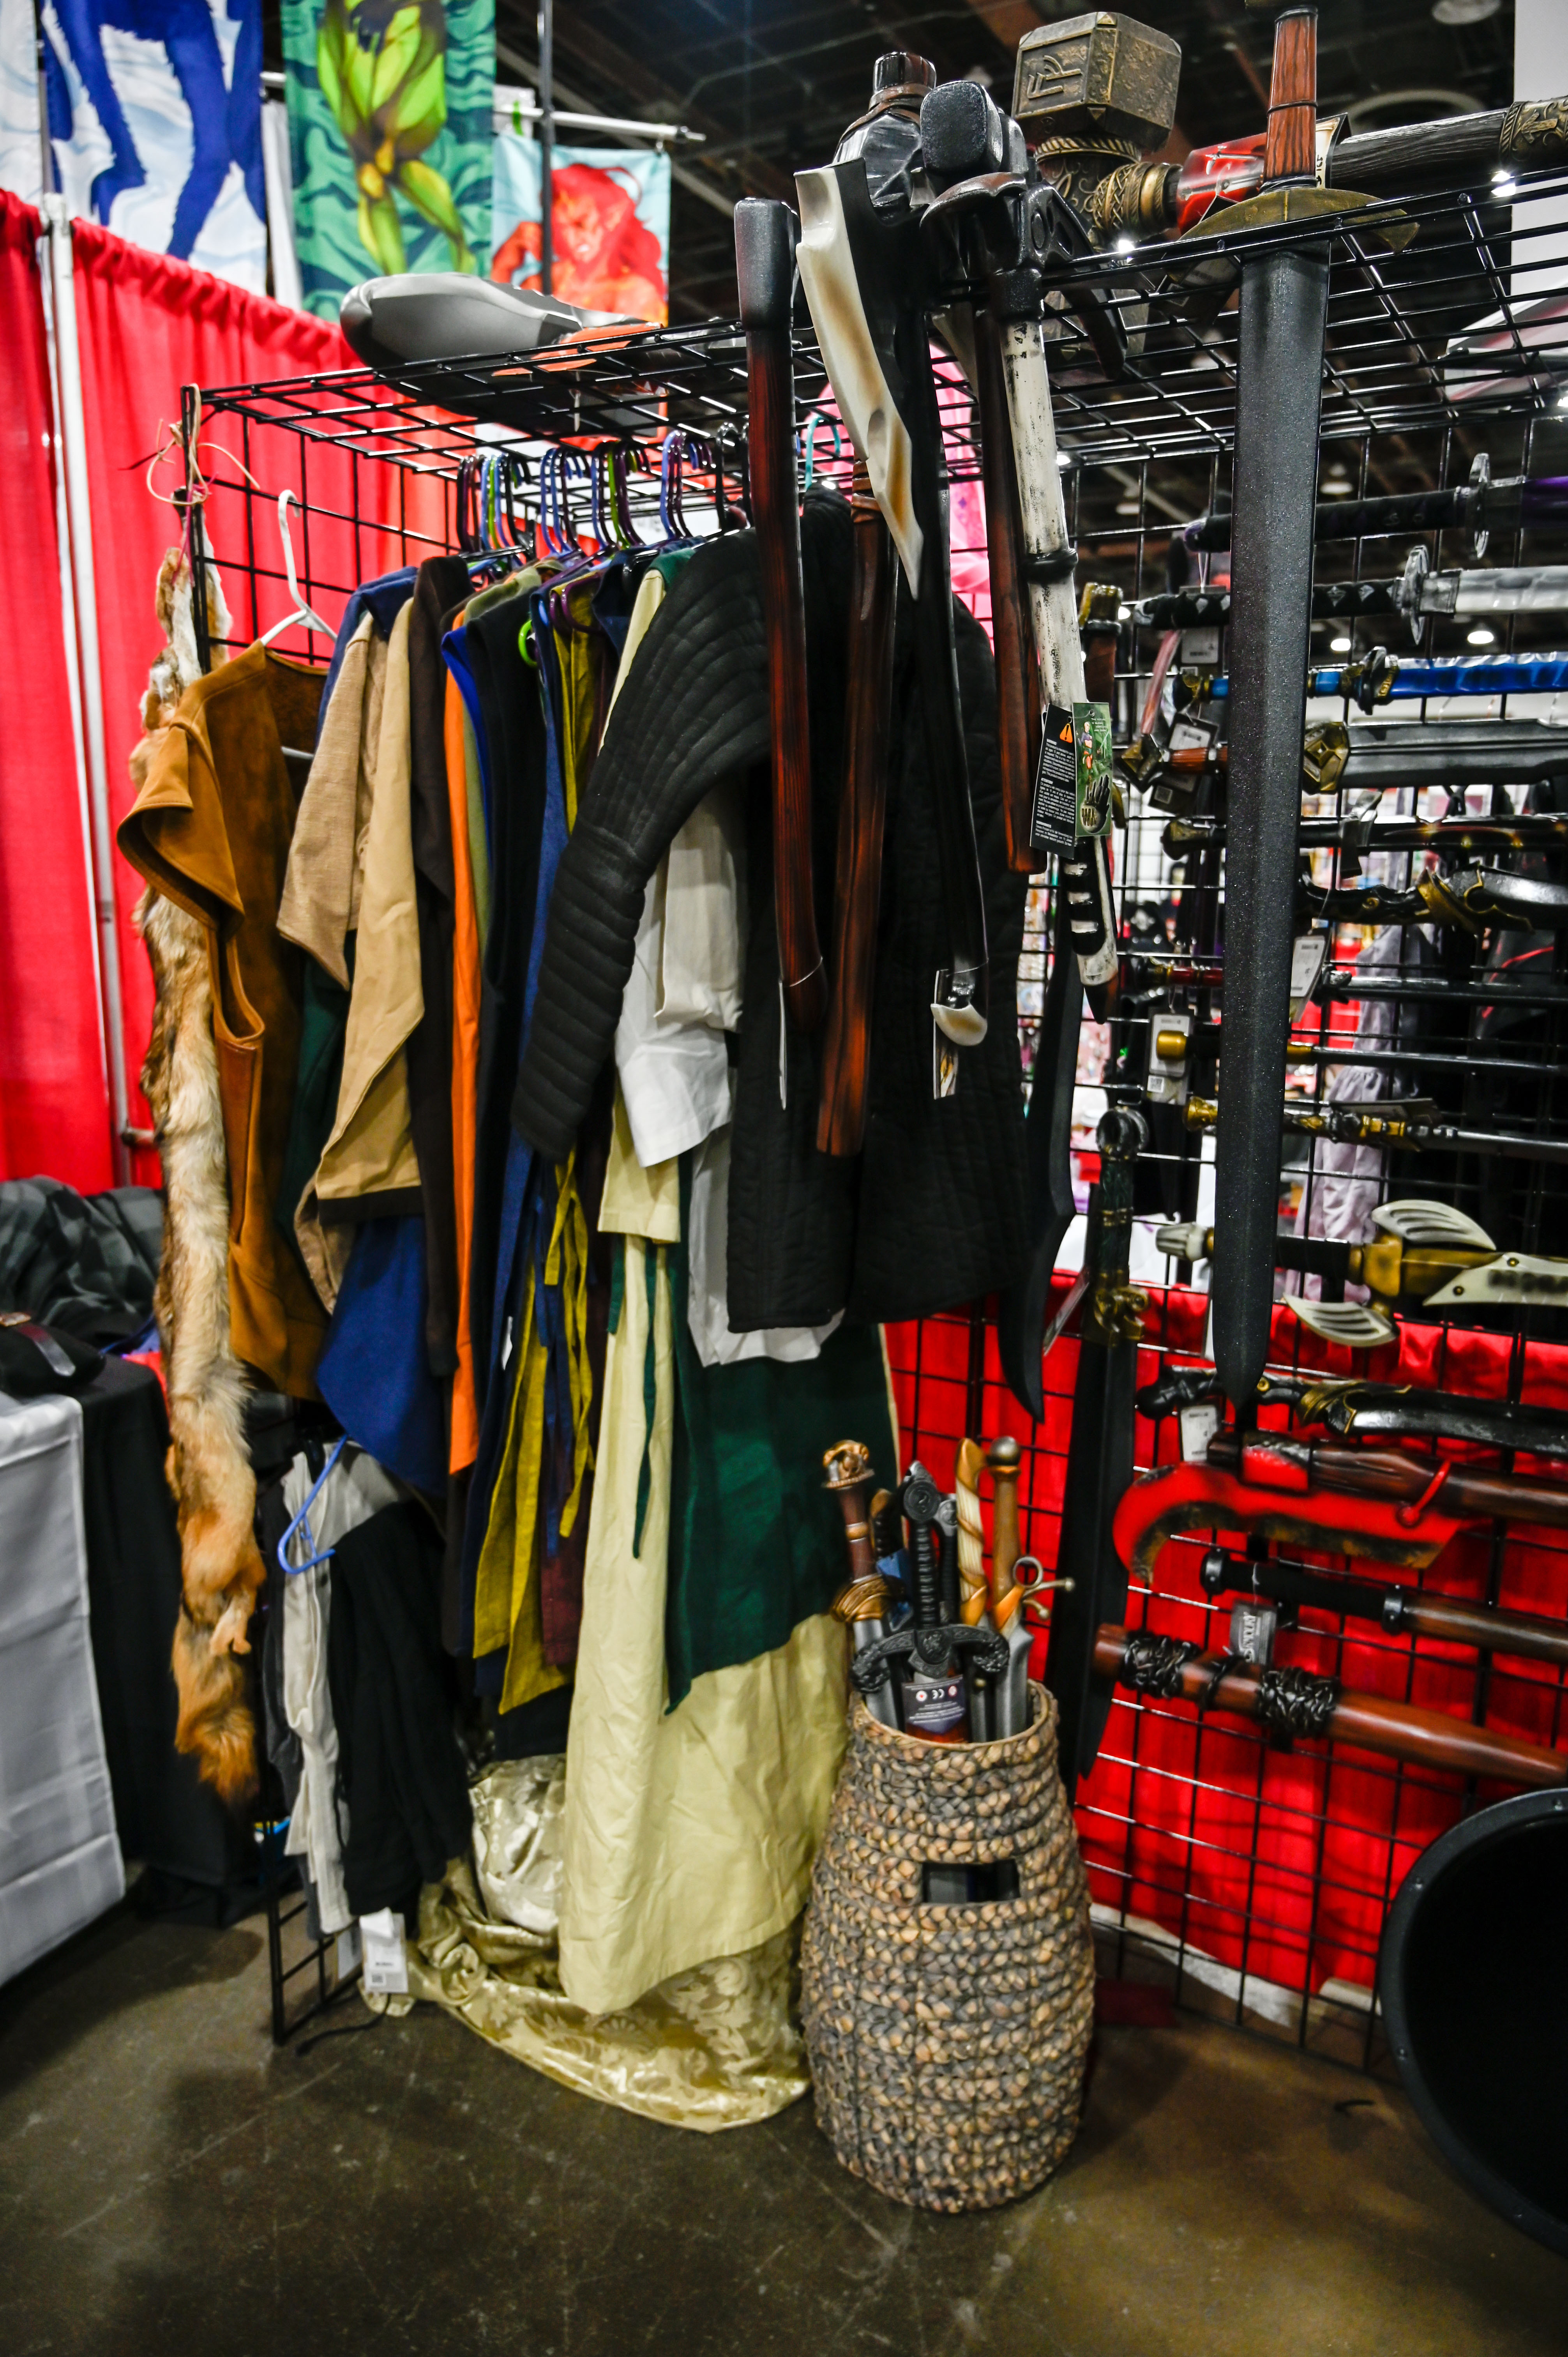 youmacon booth larptopia gambeson medieval renassance fantasy clothing and larp foam weapons